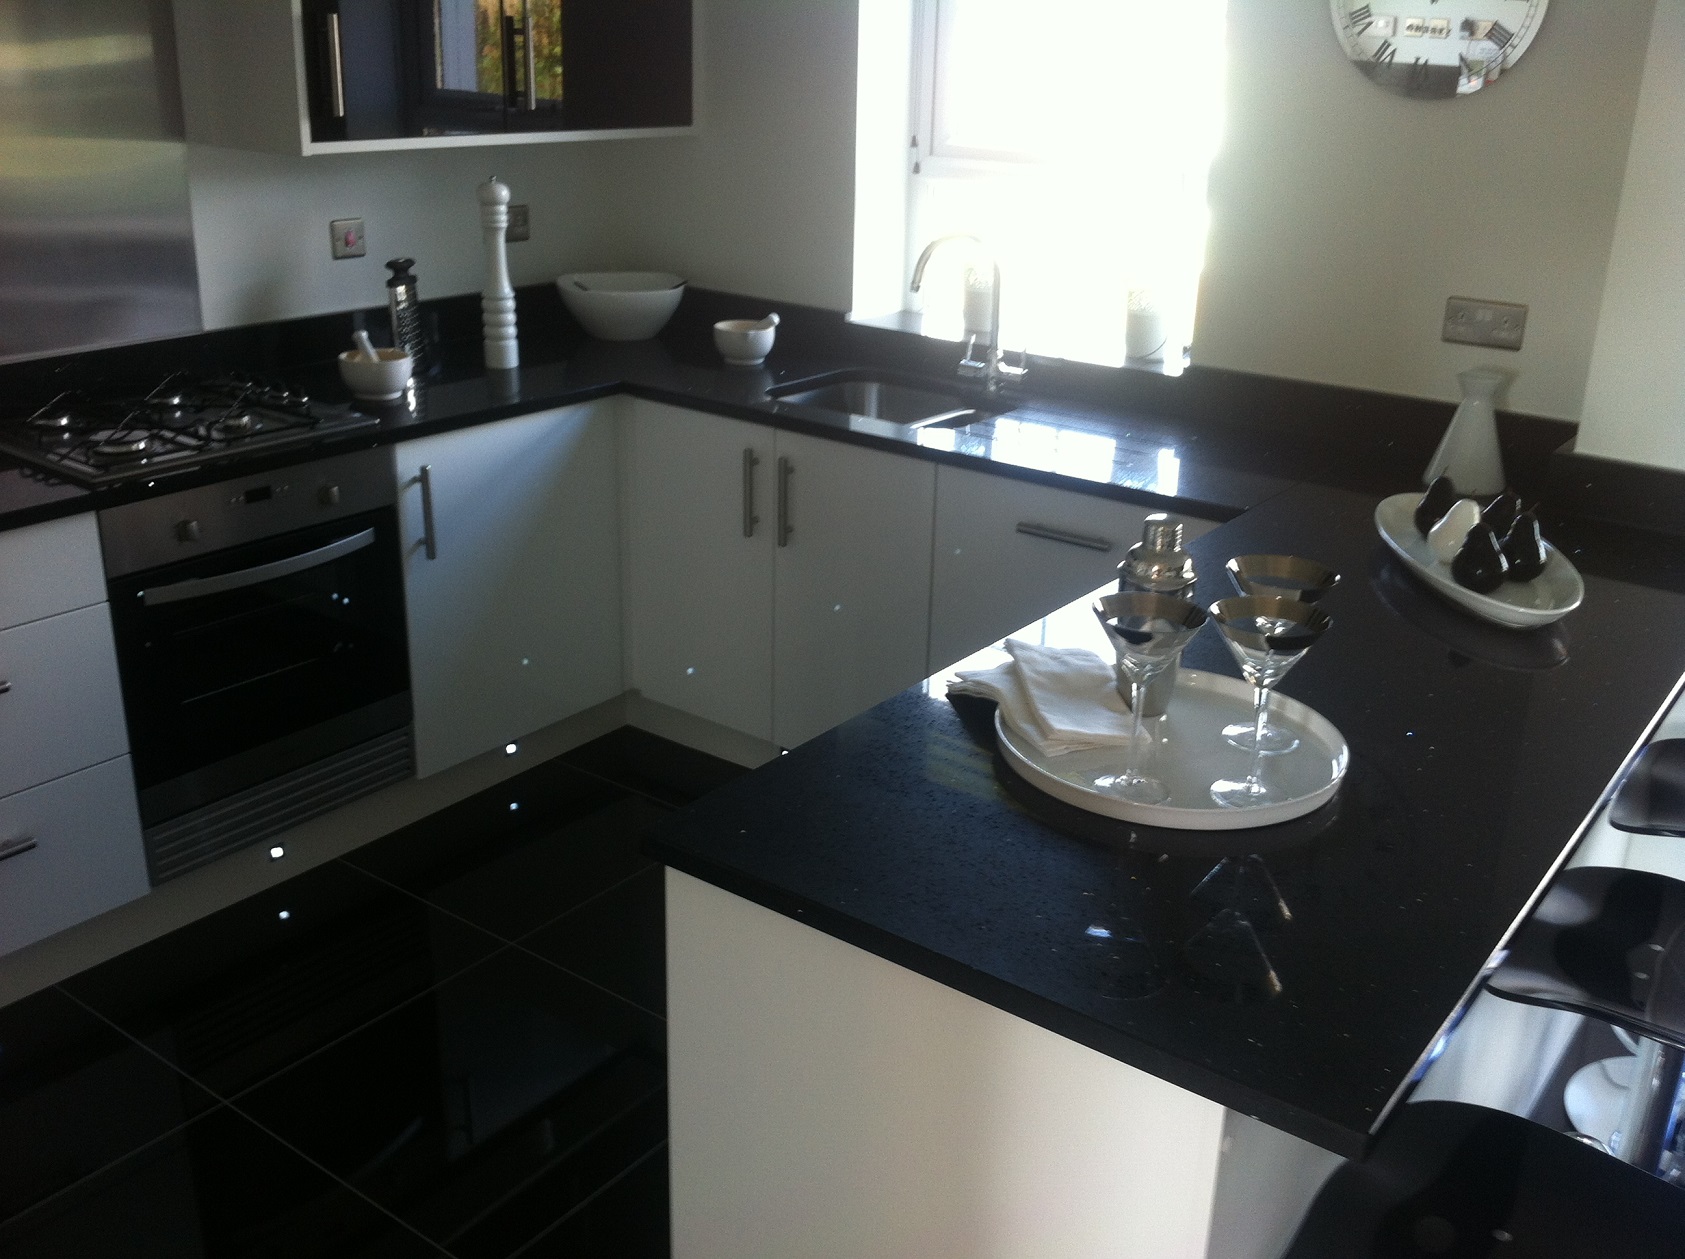 We supply Granite and Quartz Worktops in the east-riding-of-yorkshire Area. We supply Granite and Quartz Worktops in the Anlaby Area. We supply Granite and Quartz Worktops in the Beverley Area. We supply Granite and Quartz Worktops in the Bridlington Area. We supply Granite and Quartz Worktops in the Brough Area. We supply Granite and Quartz Worktops in the Cottingham Area. We supply Granite and Quartz Worktops in the Driffield Area. We supply Granite and Quartz Worktops in the Goole Area. We supply Granite and Quartz Worktops in the Hedon Area. We supply Granite and Quartz Worktops in the Hessle Area. We supply Granite and Quartz Worktops in the Hornsea Area. We supply Granite and Quartz Worktops in the Howden Area. We supply Granite and Quartz Worktops in the Leven Area. We supply Granite and Quartz Worktops in the Market-Weighton Area. We supply Granite and Quartz Worktops in the Patrington Area. We supply Granite and Quartz Worktops in the Pocklington Area. We supply Granite and Quartz Worktops in the Preston Area. We supply Granite and Quartz Worktops in the Snaith Area. We supply Granite and Quartz Worktops in the South-Cave Area. We supply Granite and Quartz Worktops in the Willerby Area. We supply Granite and Quartz Worktops in the Withernsea Area.